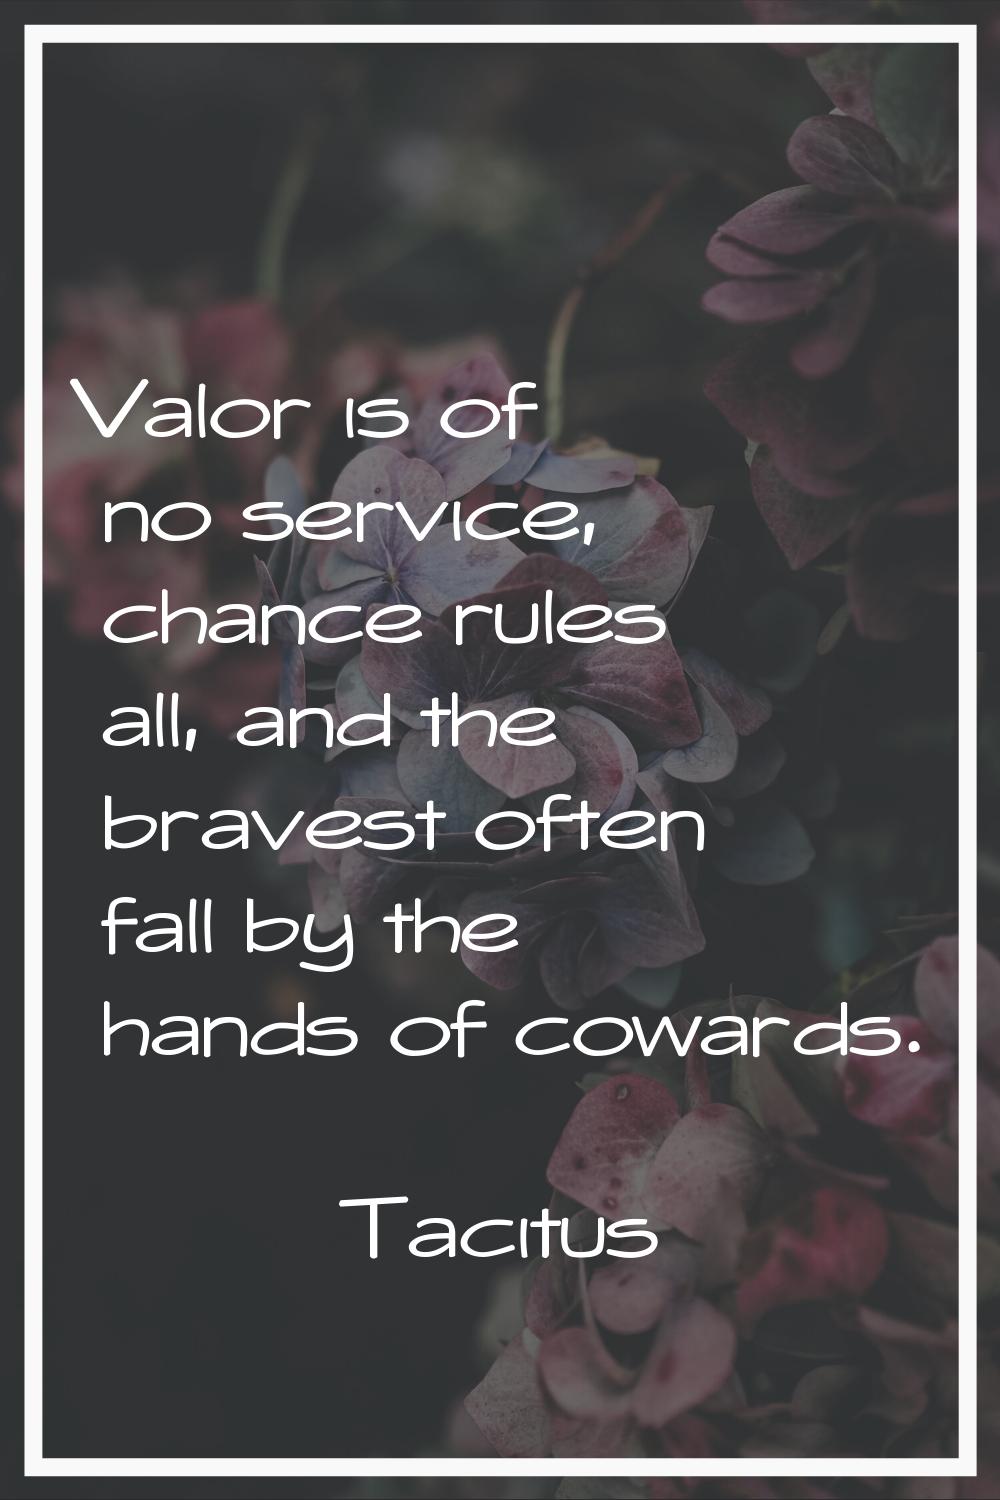 Valor is of no service, chance rules all, and the bravest often fall by the hands of cowards.